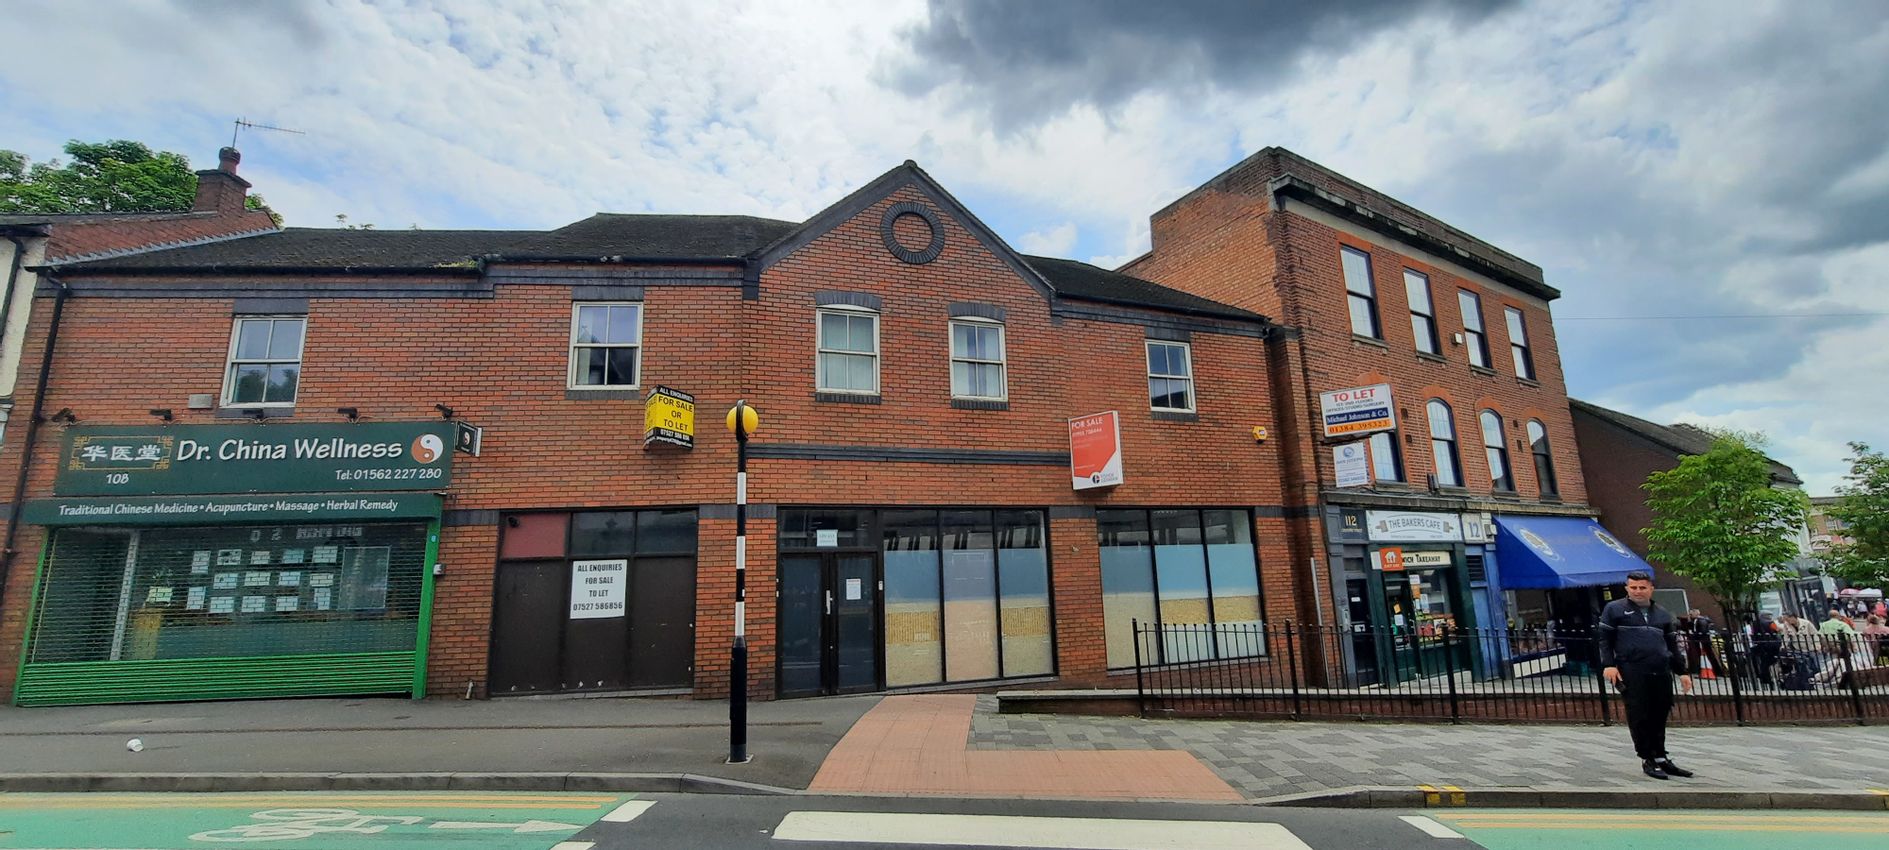 109-111 Coventry Street, Kidderminster, Worcestershire, DY10 2BH